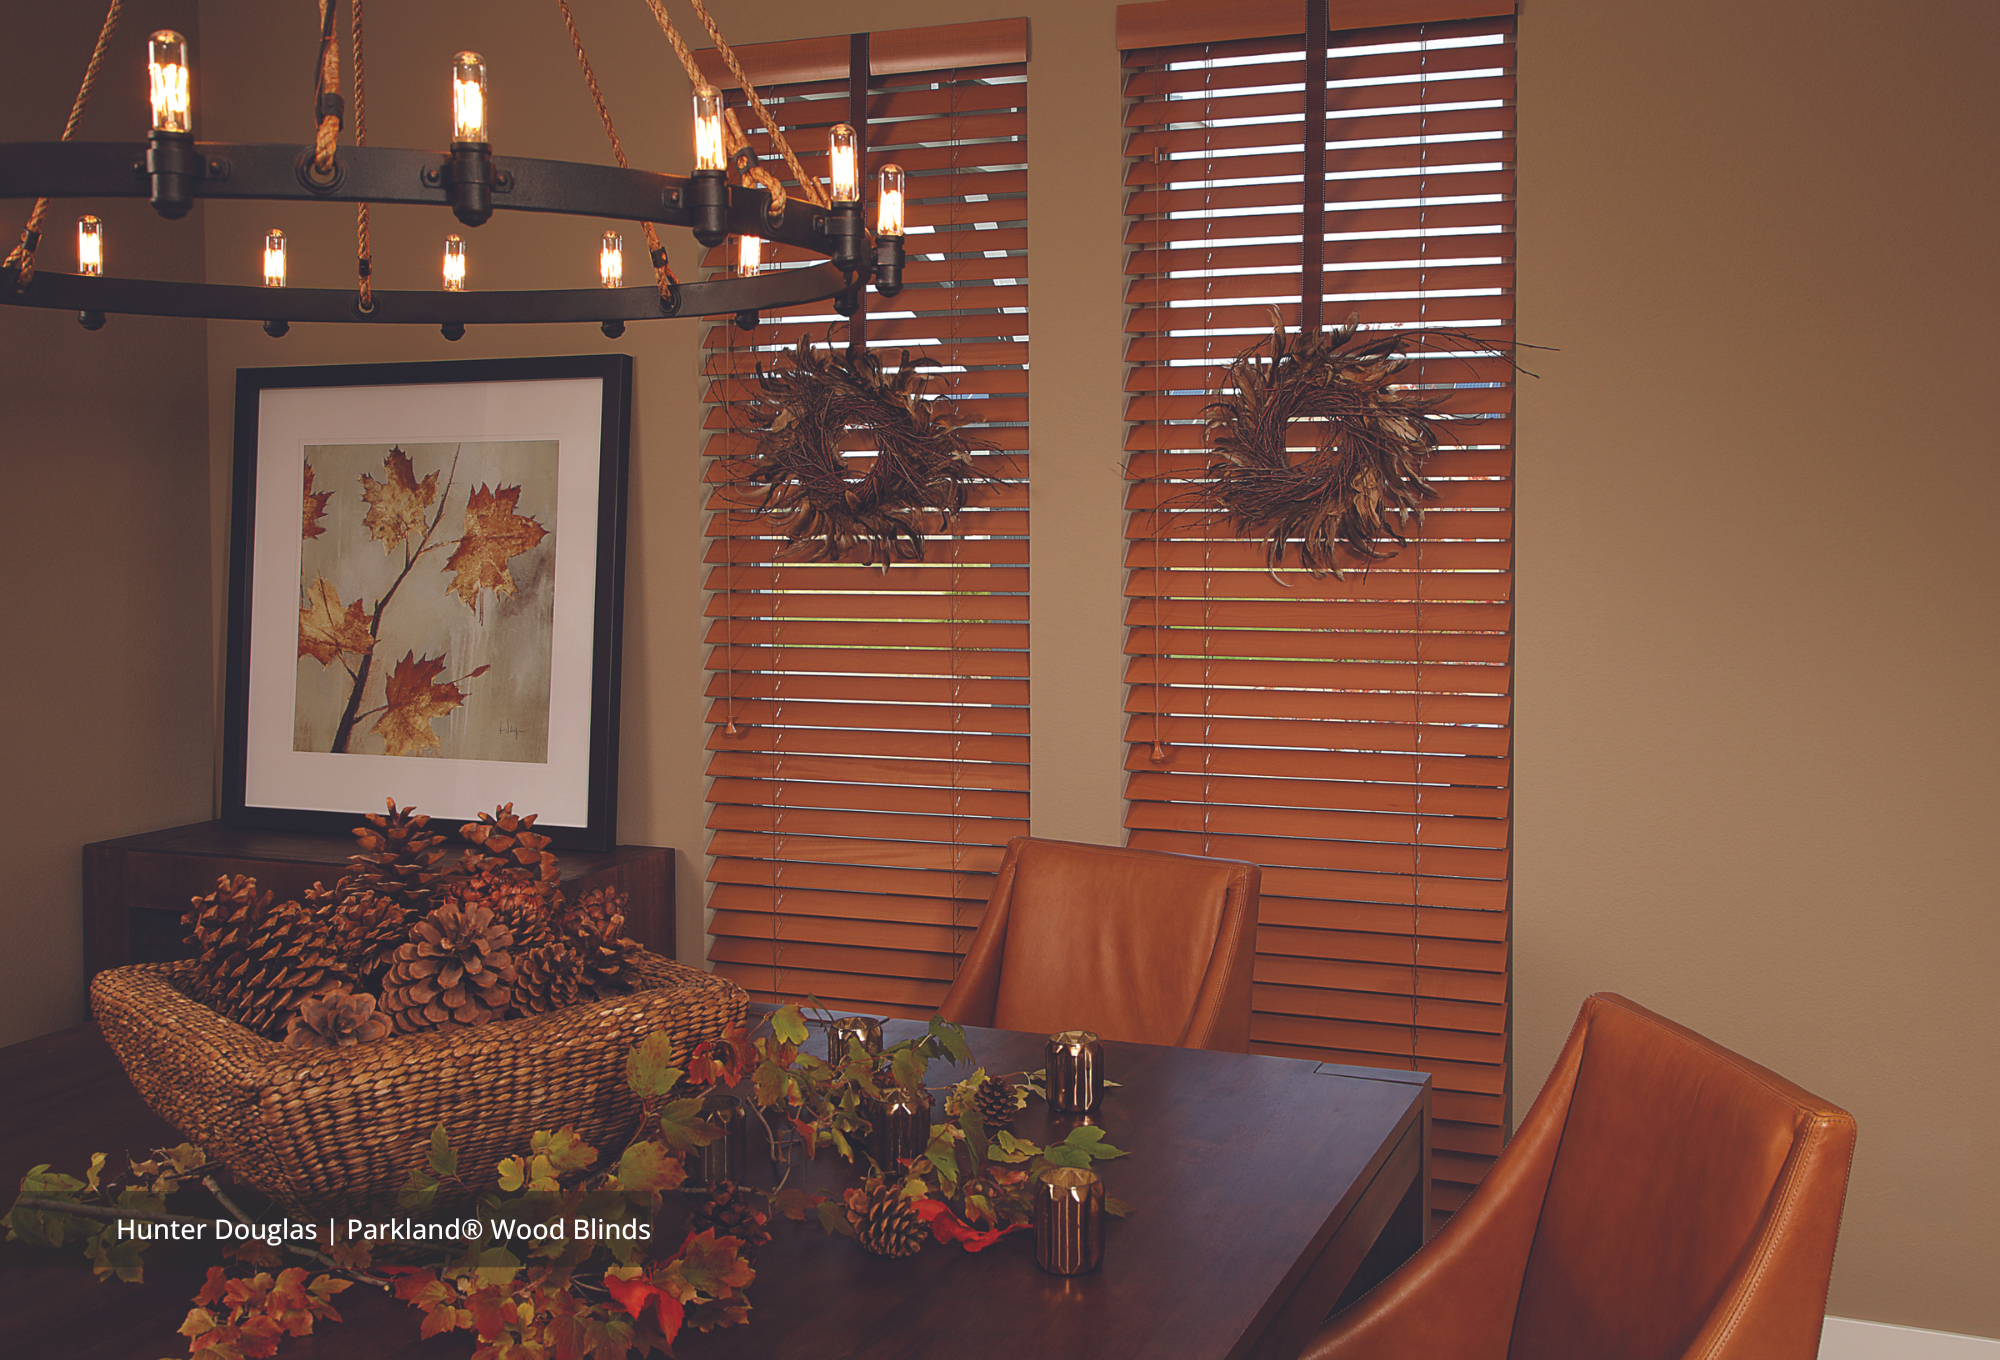 Hunter Douglas | Parkland® Wood Blinds perfect for fall decor. Available at JC Licht in Chicago, IL.